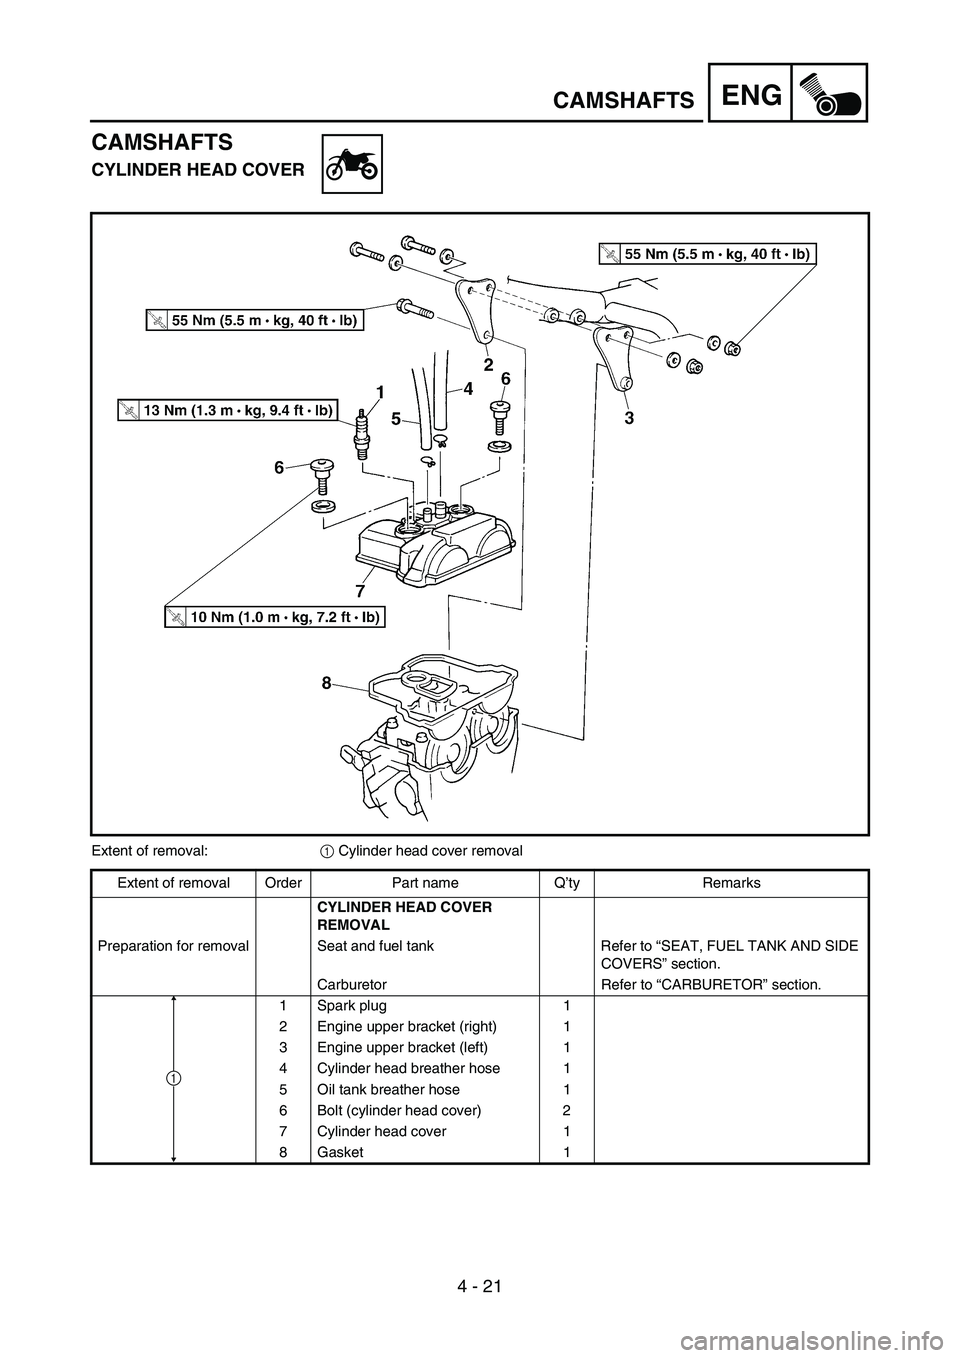 YAMAHA YZ450F 2005 Owners Manual 4 - 21
ENGCAMSHAFTS
CAMSHAFTS
CYLINDER HEAD COVER
Extent of removal:
1 Cylinder head cover removal
Extent of removal Order Part name Q’ty Remarks
CYLINDER HEAD COVER 
REMOVAL
Preparation for removal